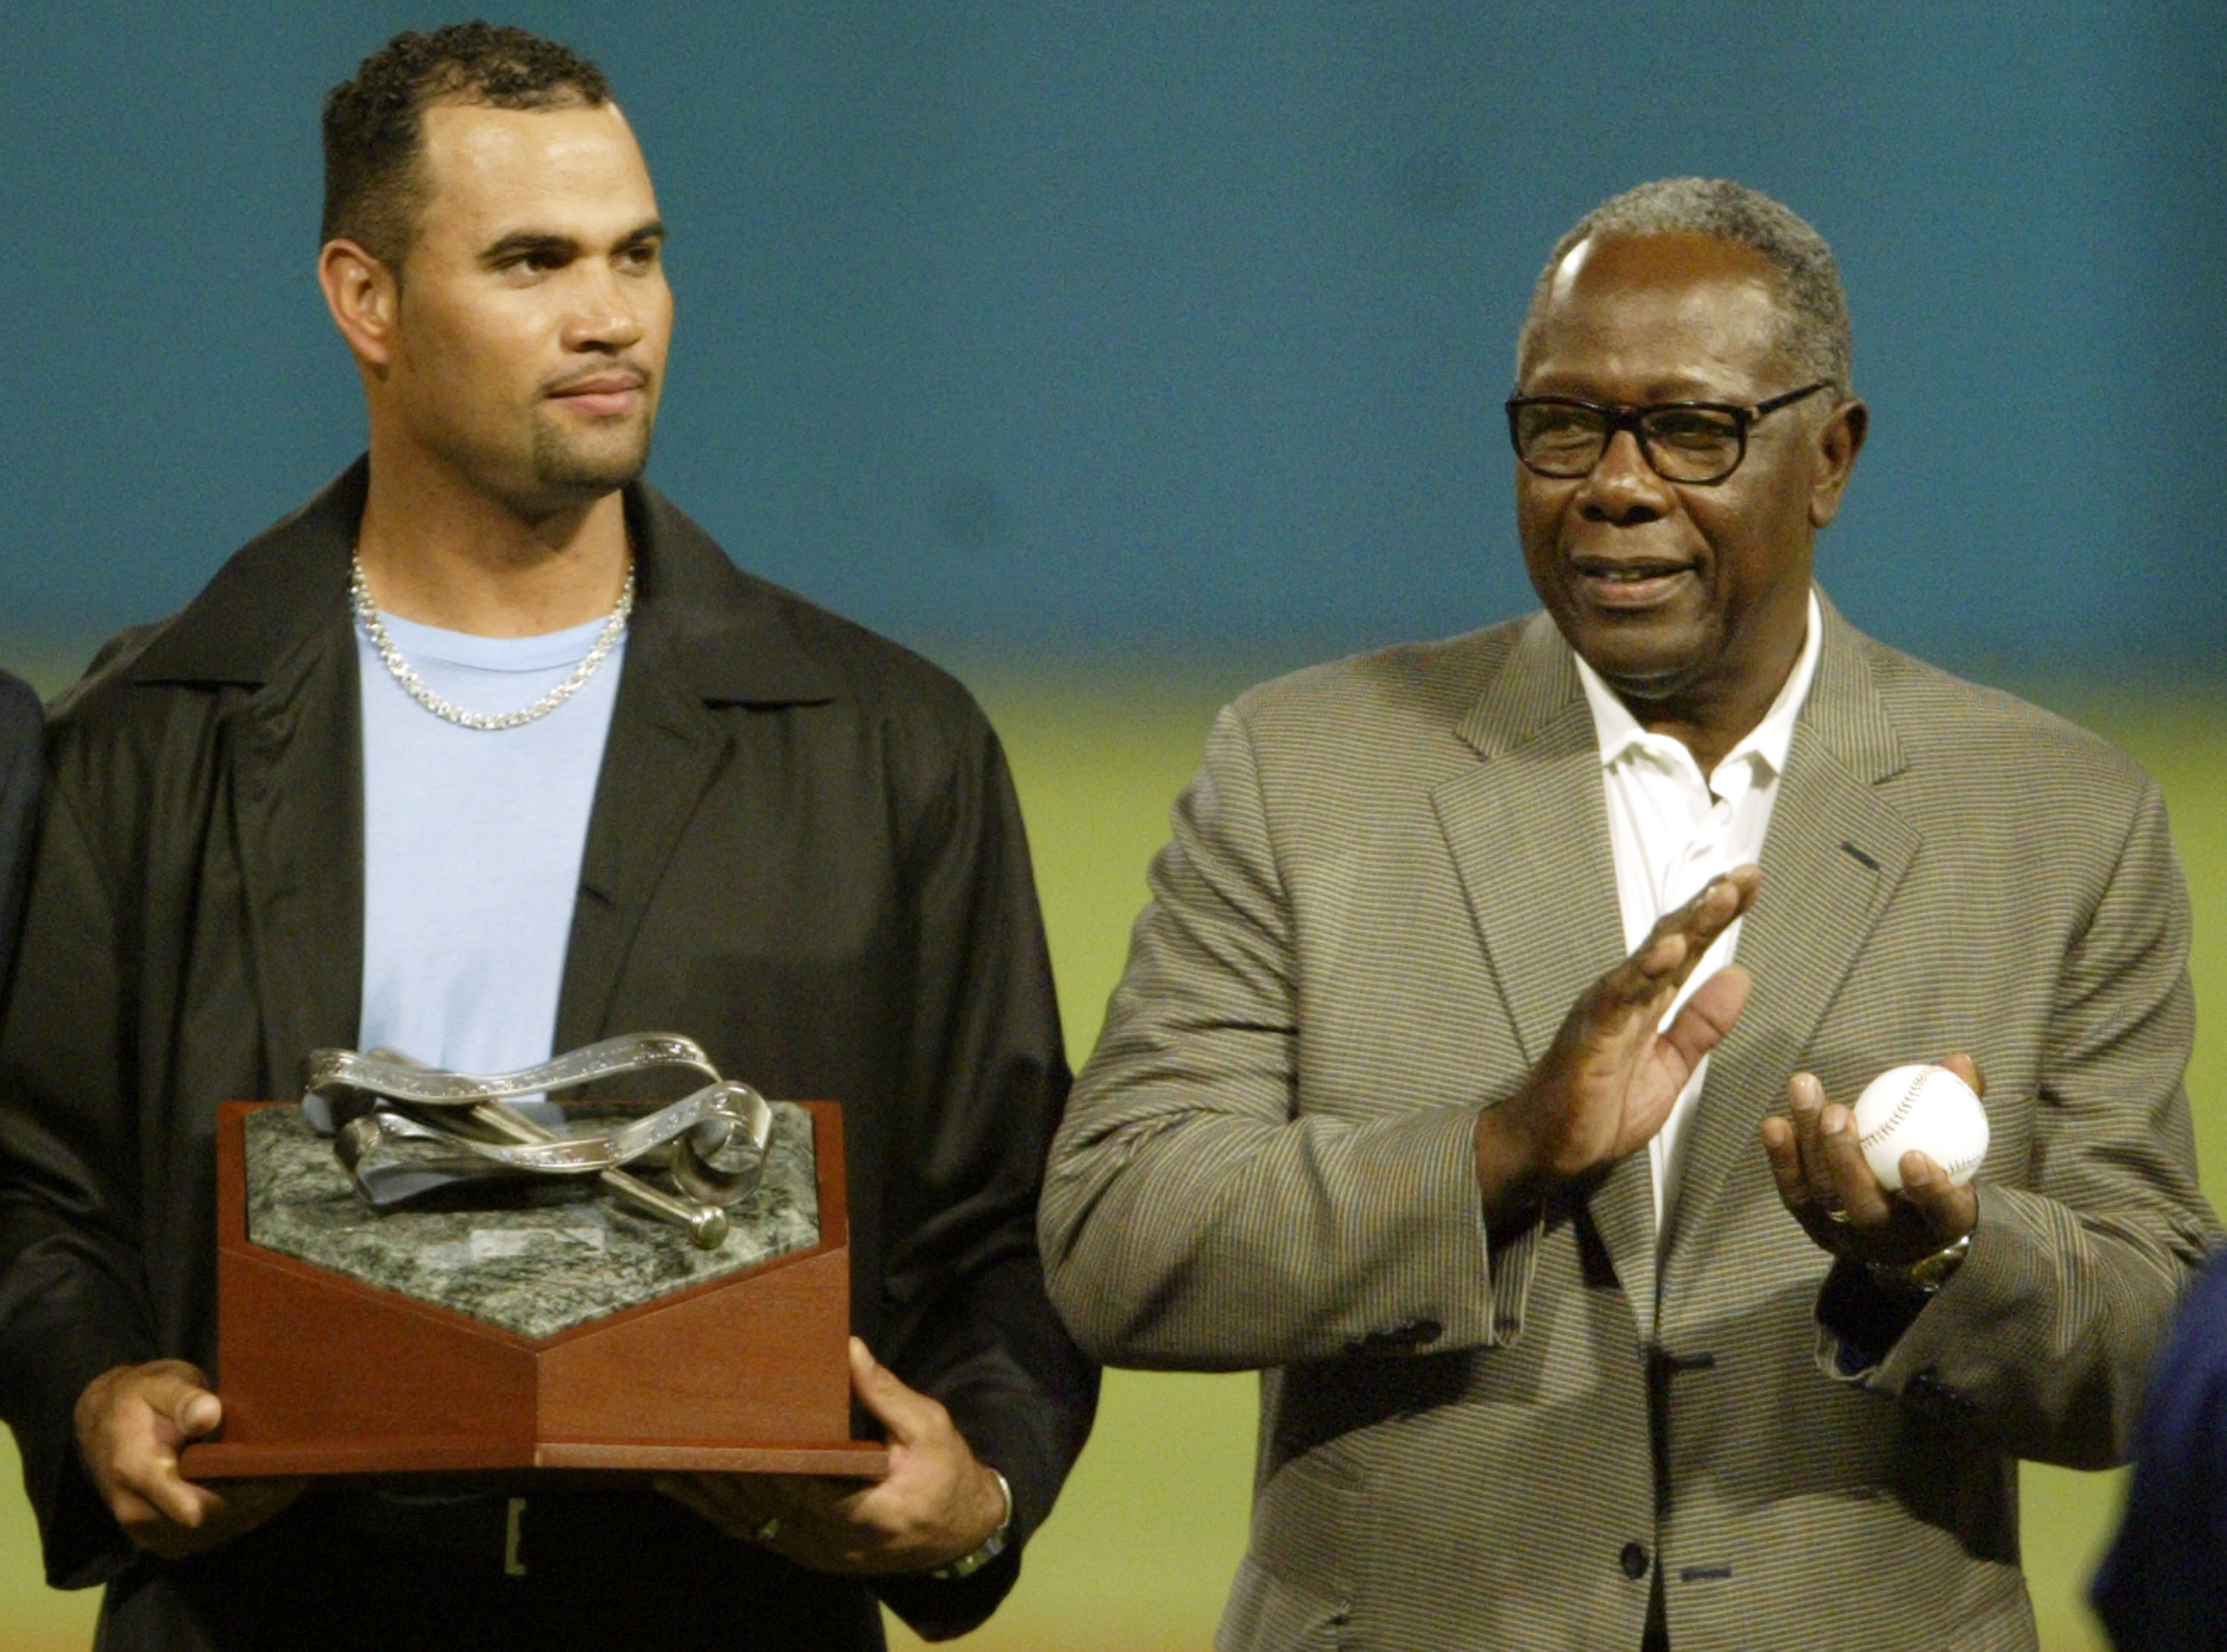 MIAMI - OCTOBER 22:  Albert Pujols of the St. Louis Cardinals wins the National League Hank Aaron Award prior to game four of the Major League Baseball World Series between the New York Yankee and the Florida Marlins on October 22, 2003 at Pro Player Stad